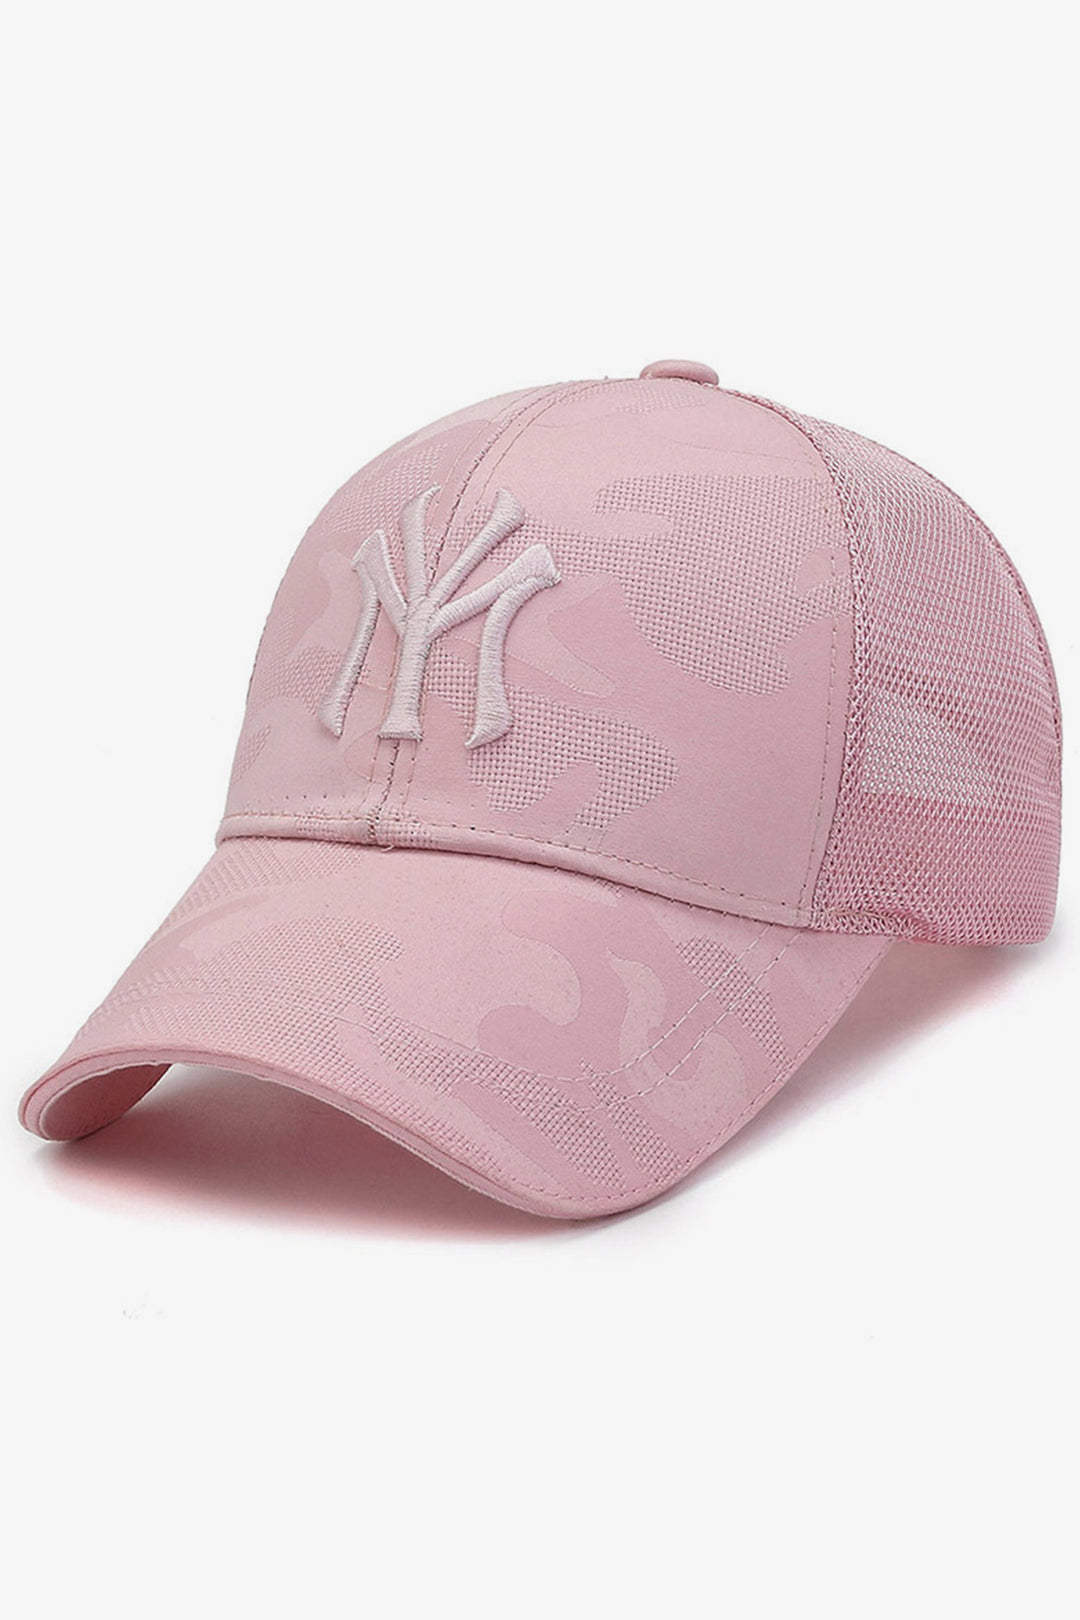 Pink Embroidered Online Caps in Pakistan